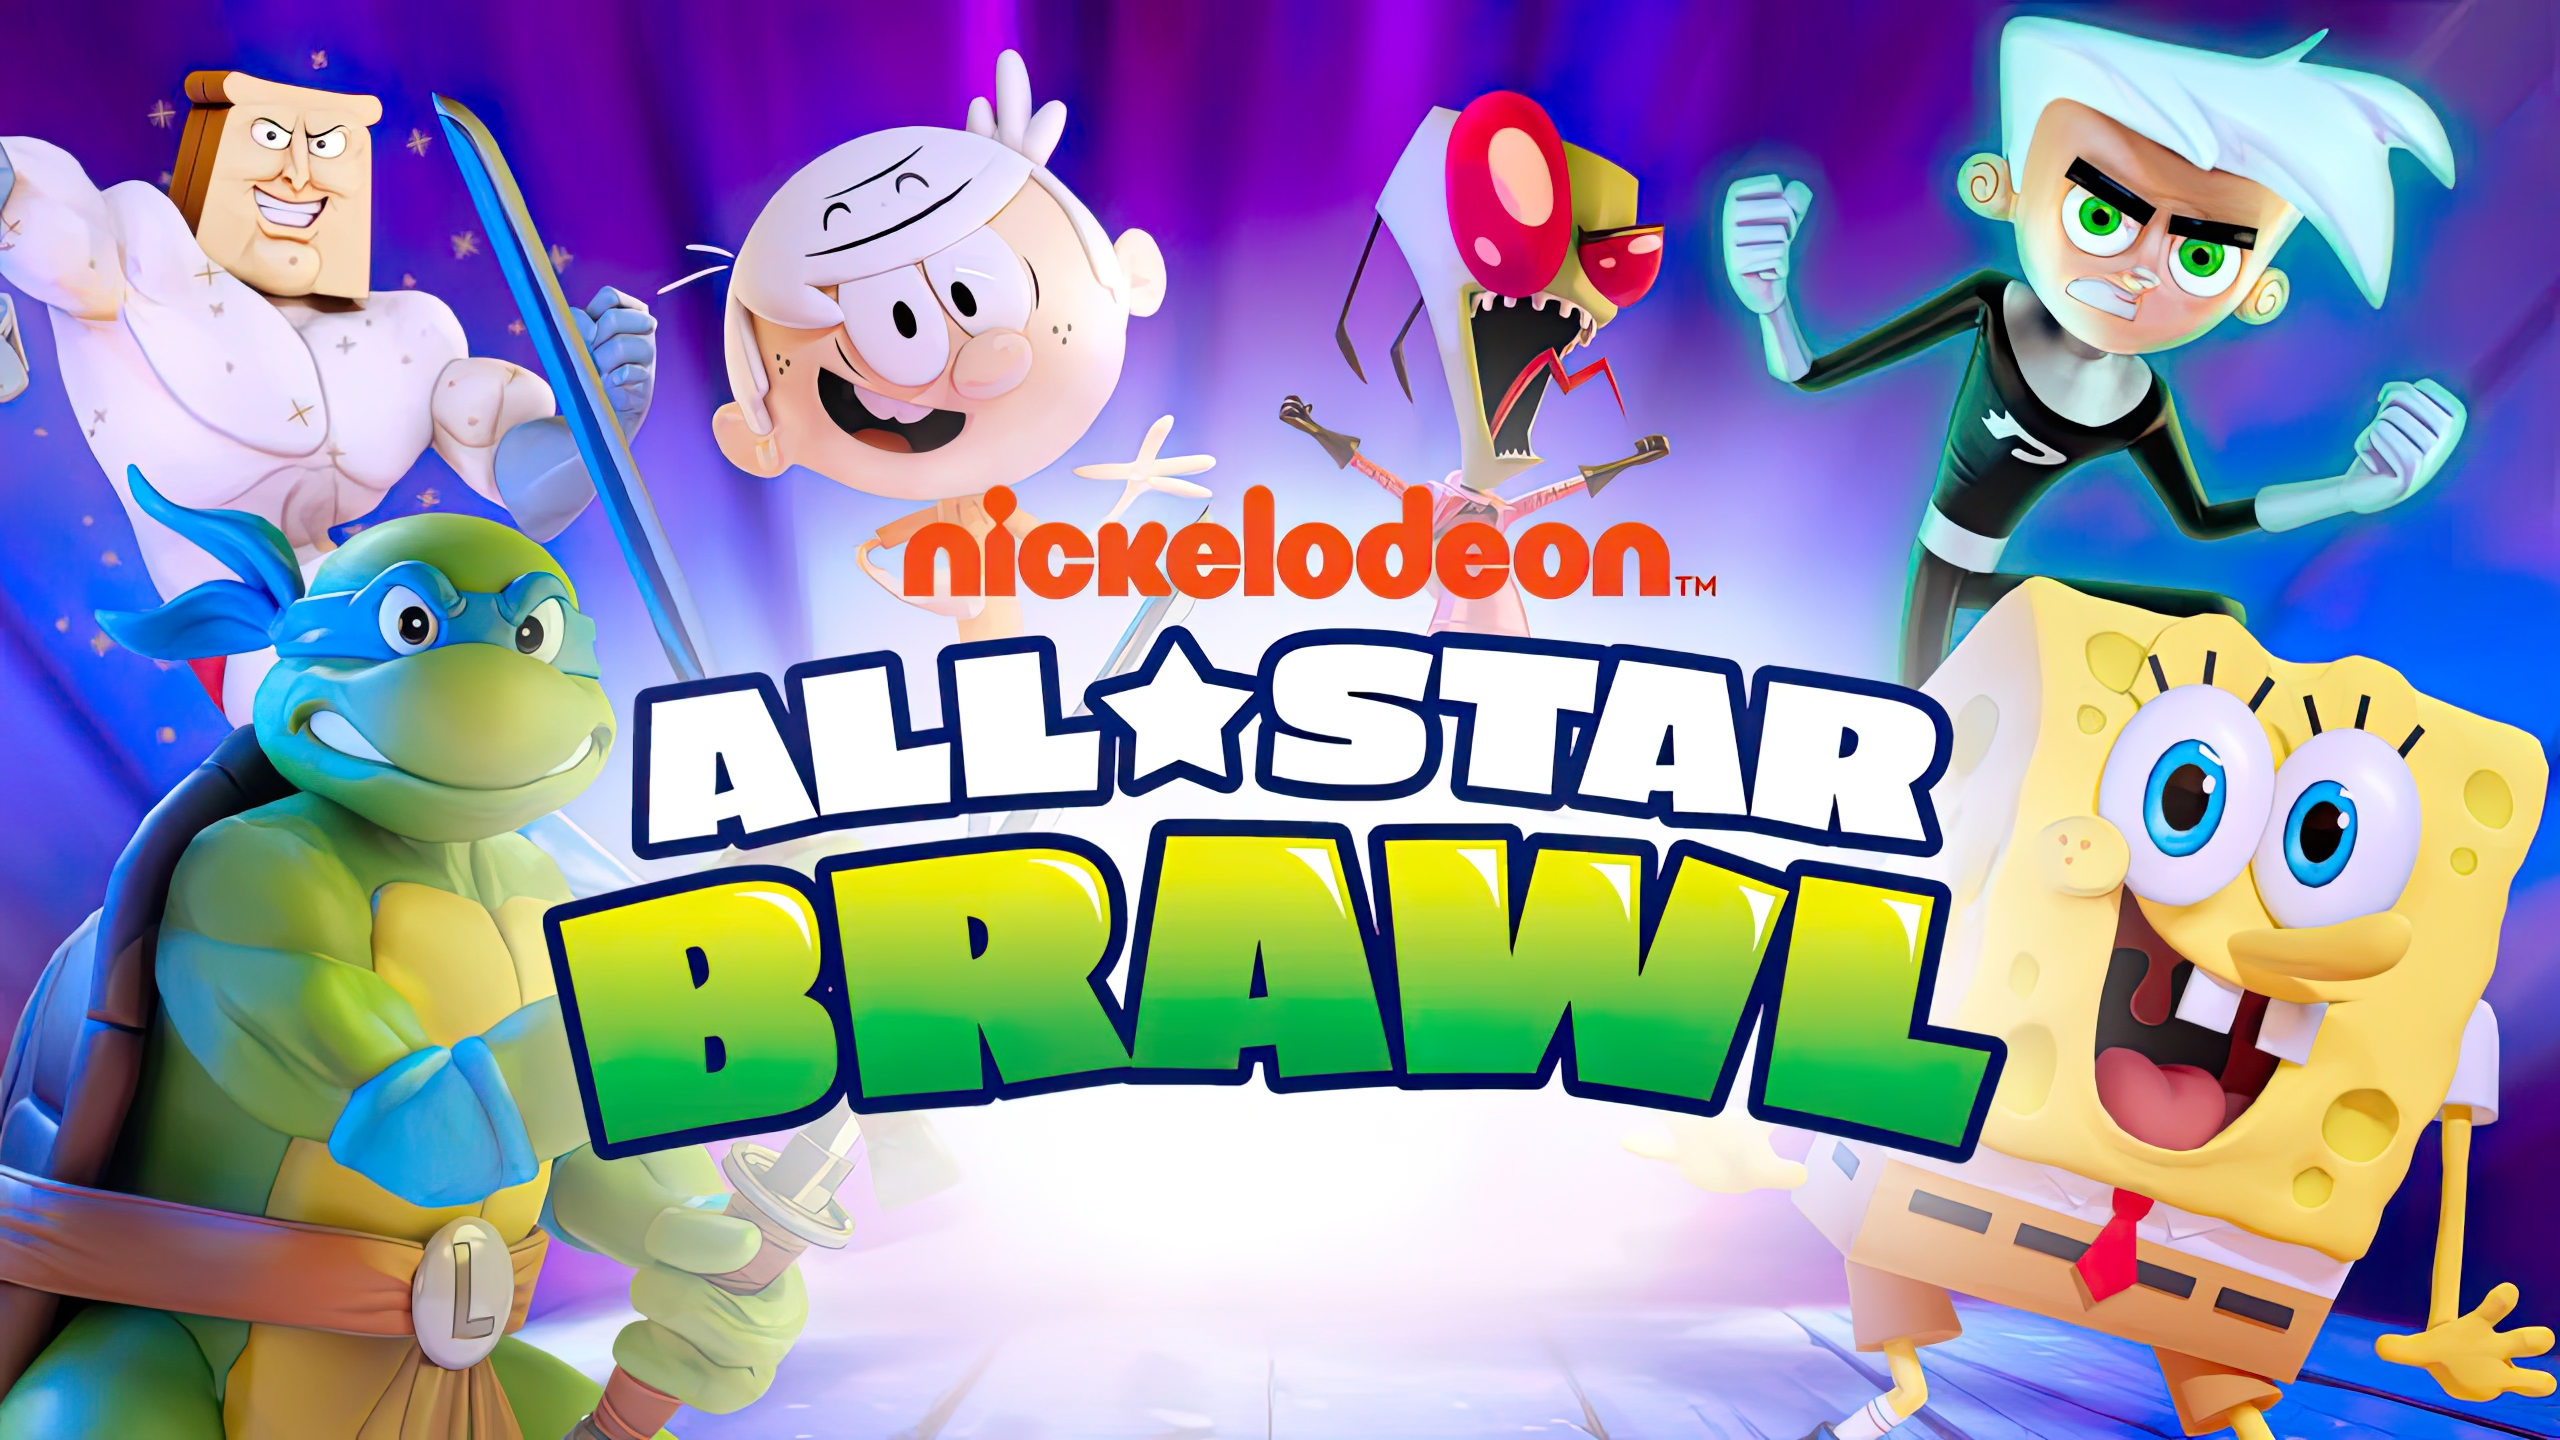 2560x1440 Nickelodeon All-Star Brawl HD Wallpapers and Backgrounds